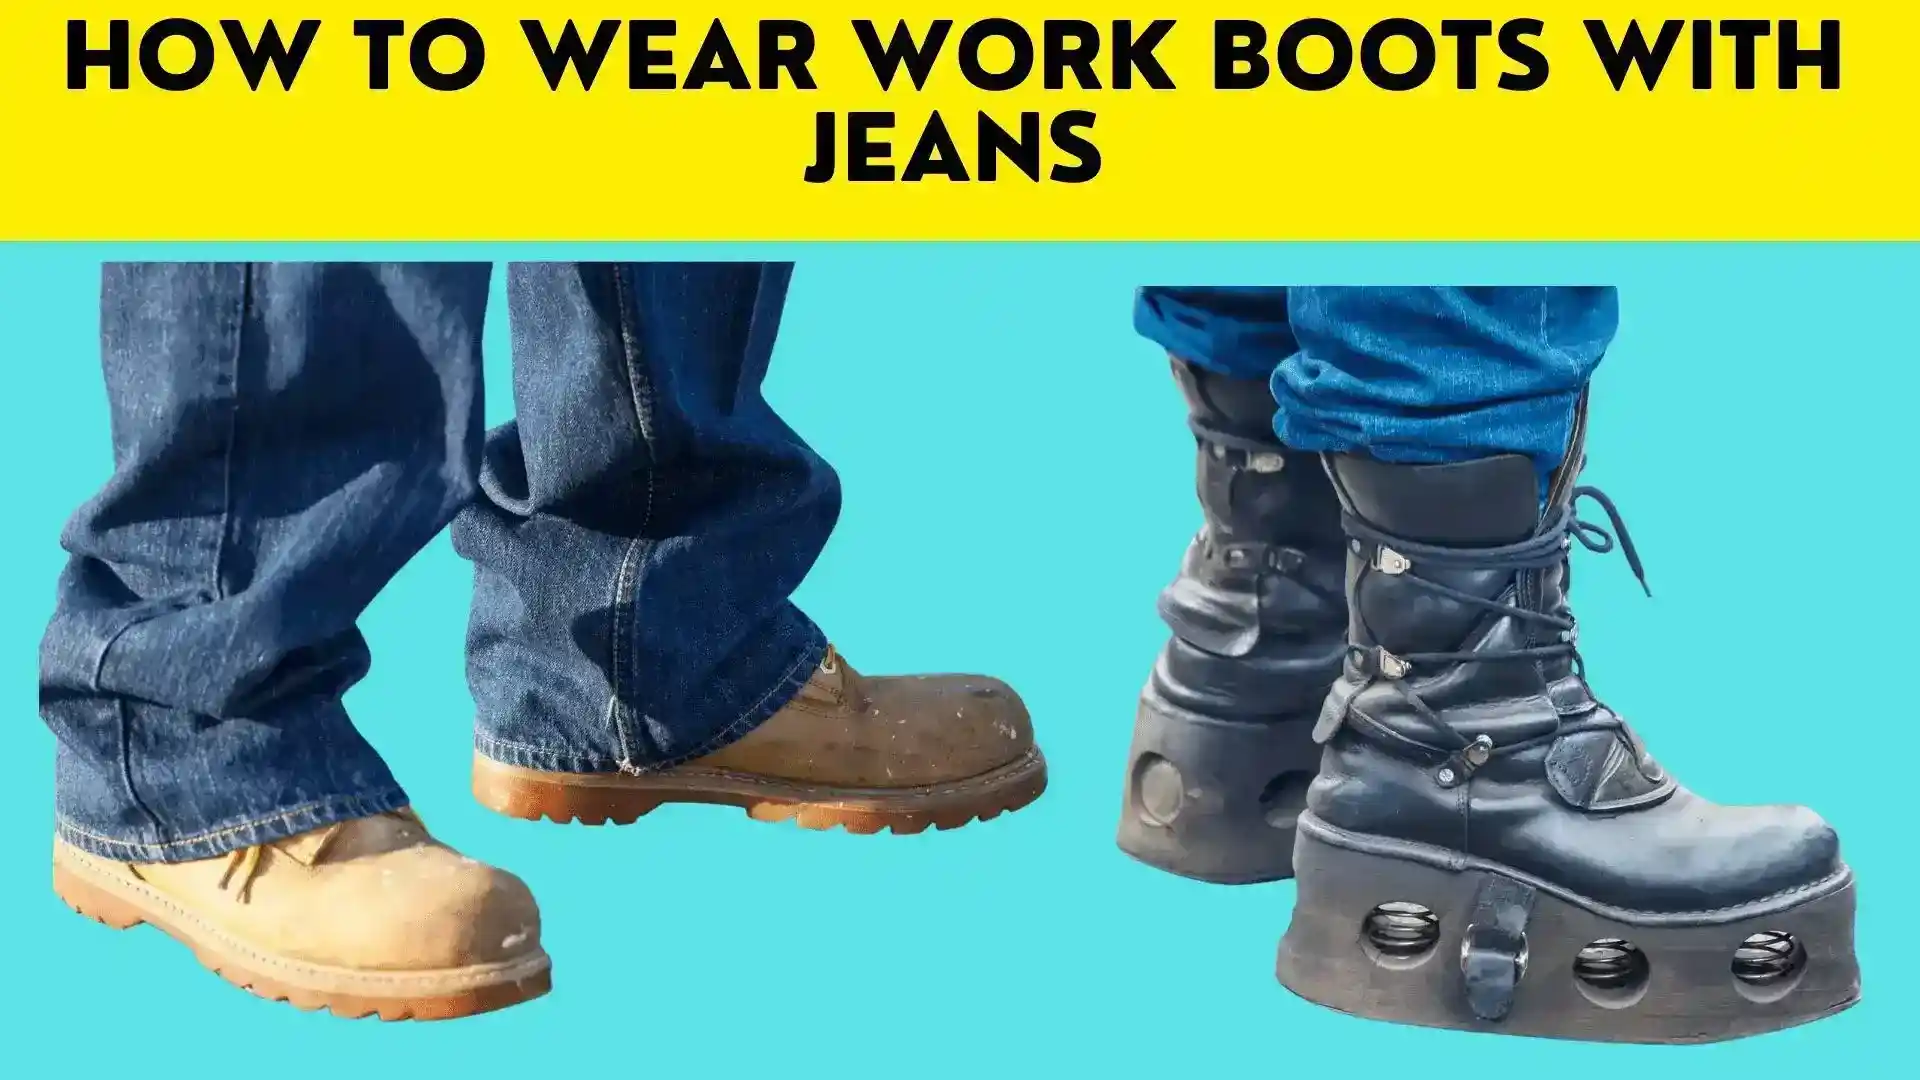 How to wear work boots with jeans